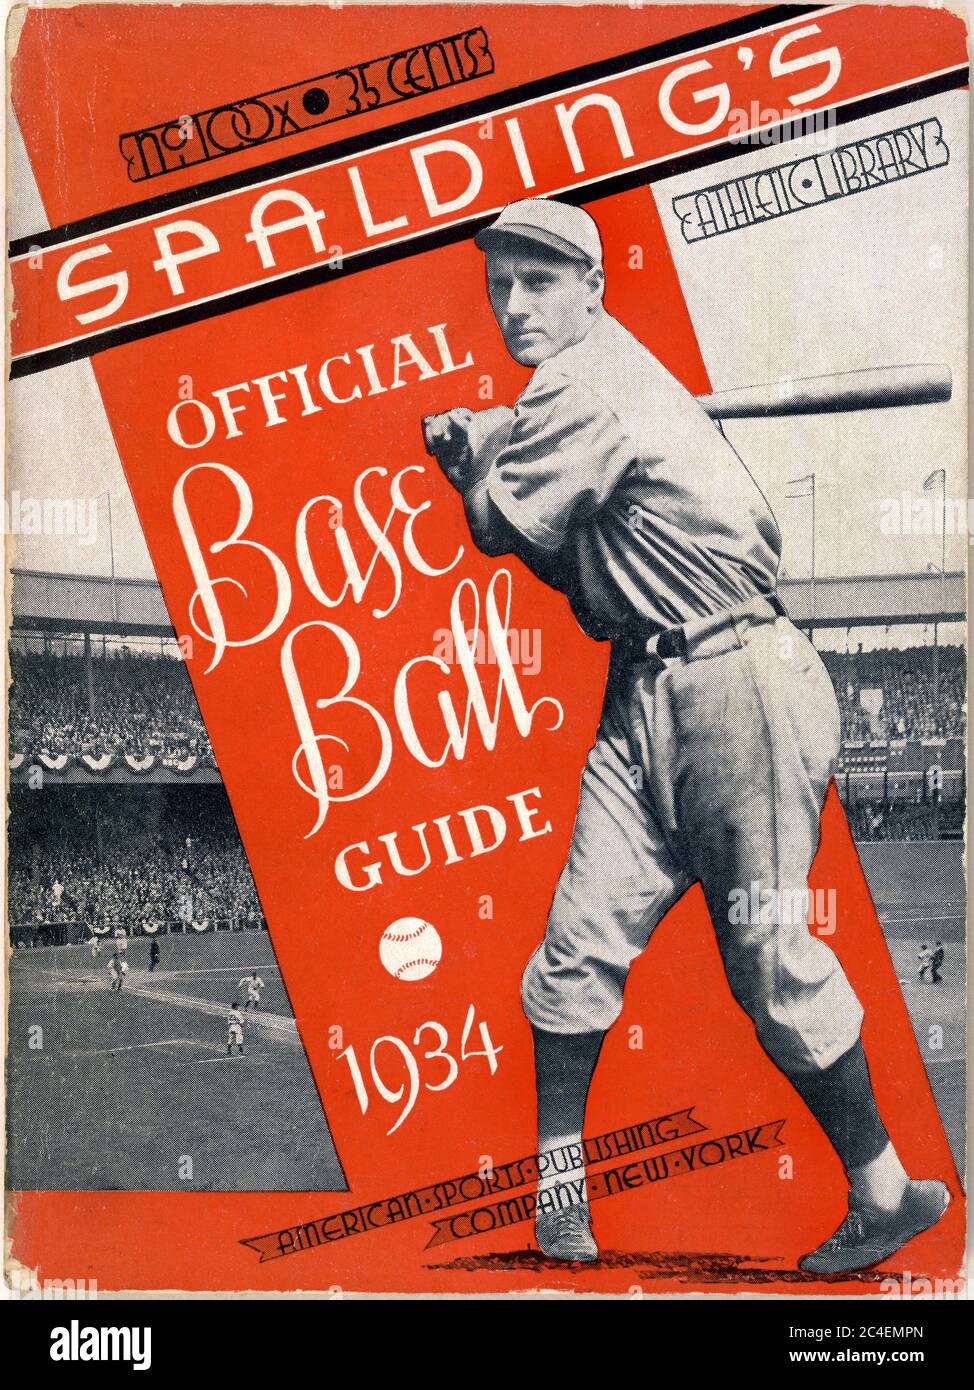 Spalding's Official Baseball Guide, A.G. Spalding & Bros., American Sports Publishing Company, 1934 Stock Photo